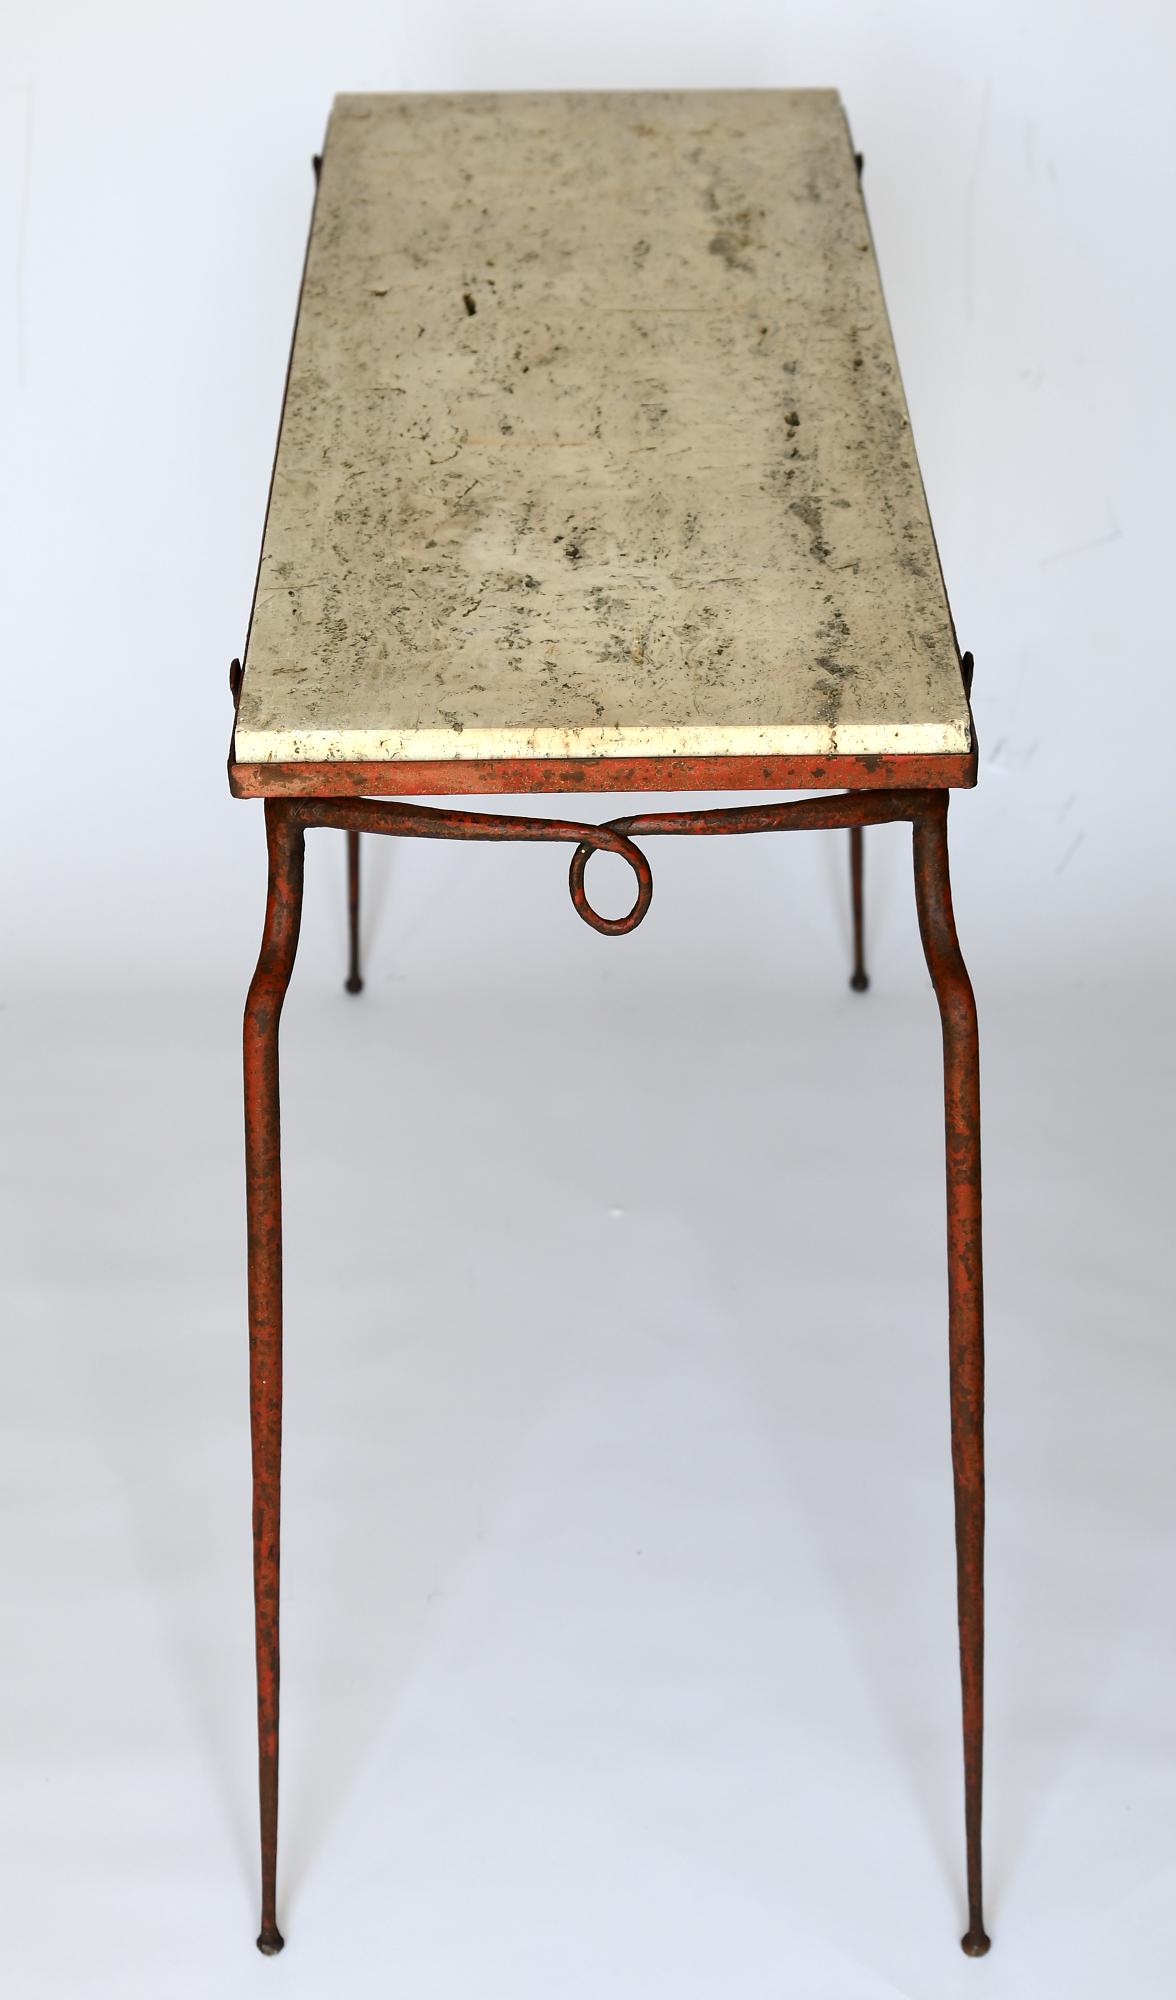 The console table attributed to Rene Prou, France 1930s
Iron with its original red color and an travertine plate
Very fine and elegant iron furniture, which emphasizes its charm through the thin legs
The furniture can also be placed freely.